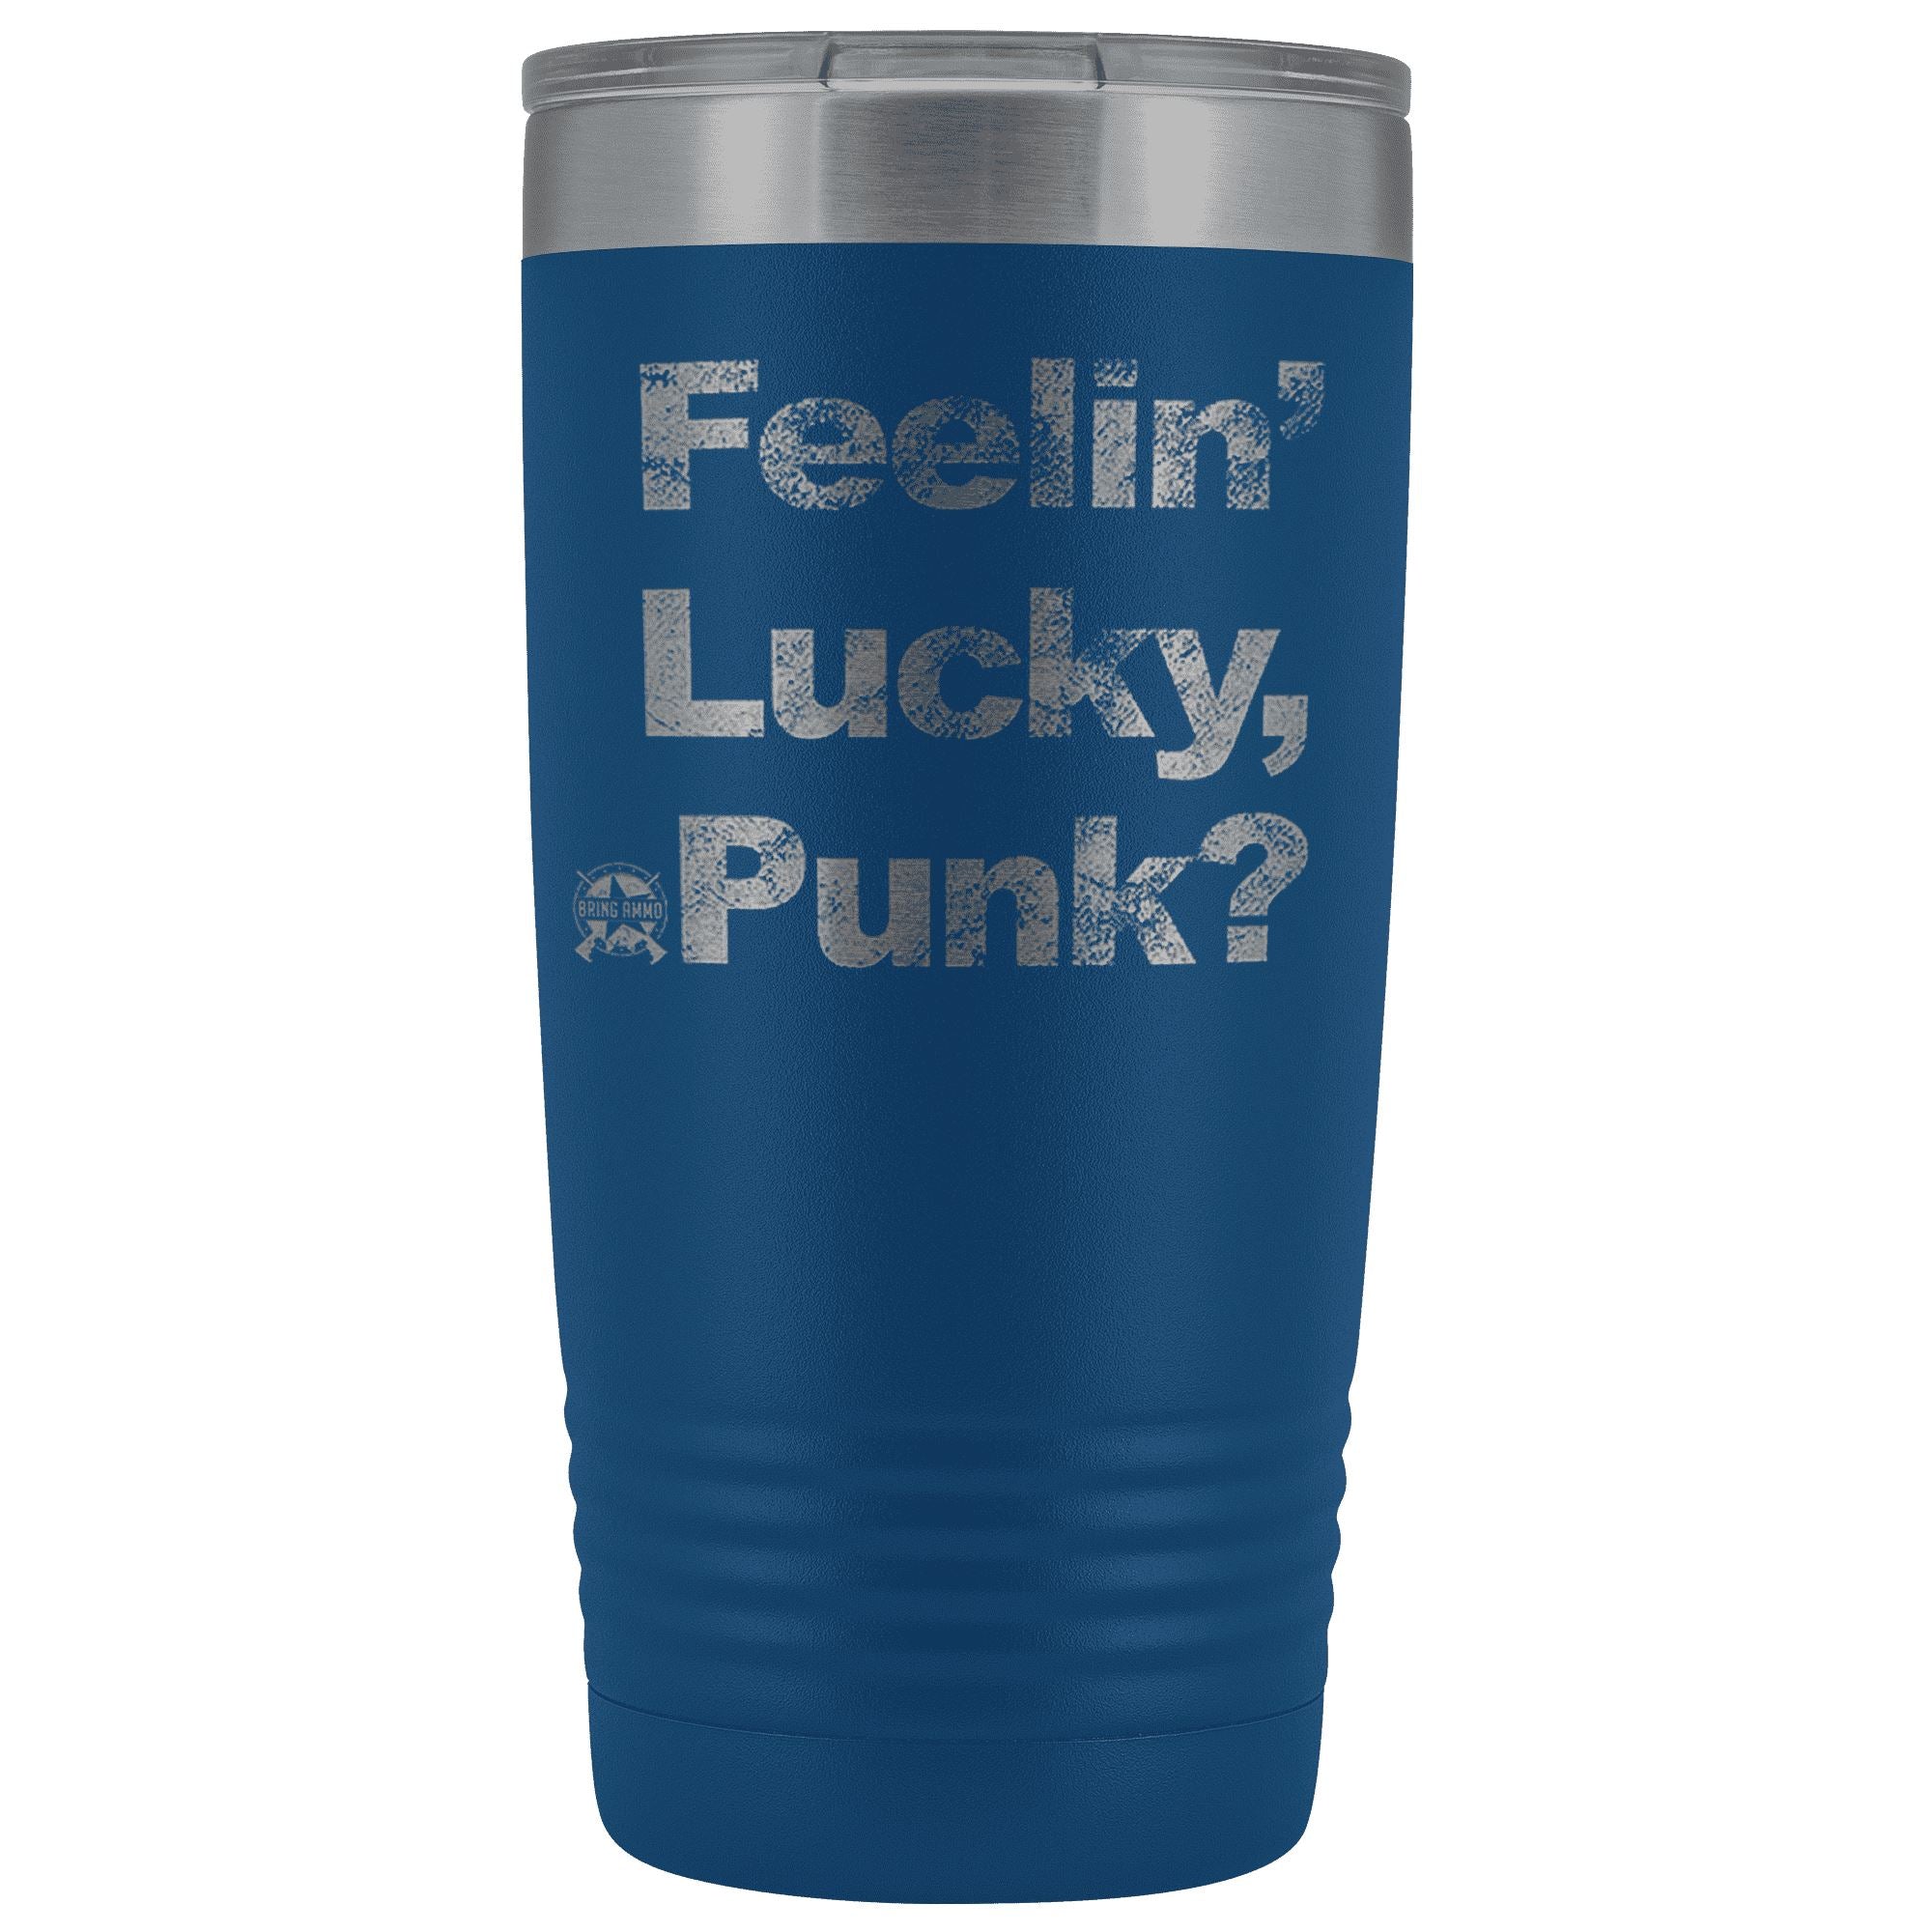 Feelin' Lucky, Punk? Dirty Harry Stainless Etched Tumbler Tumblers Blue 